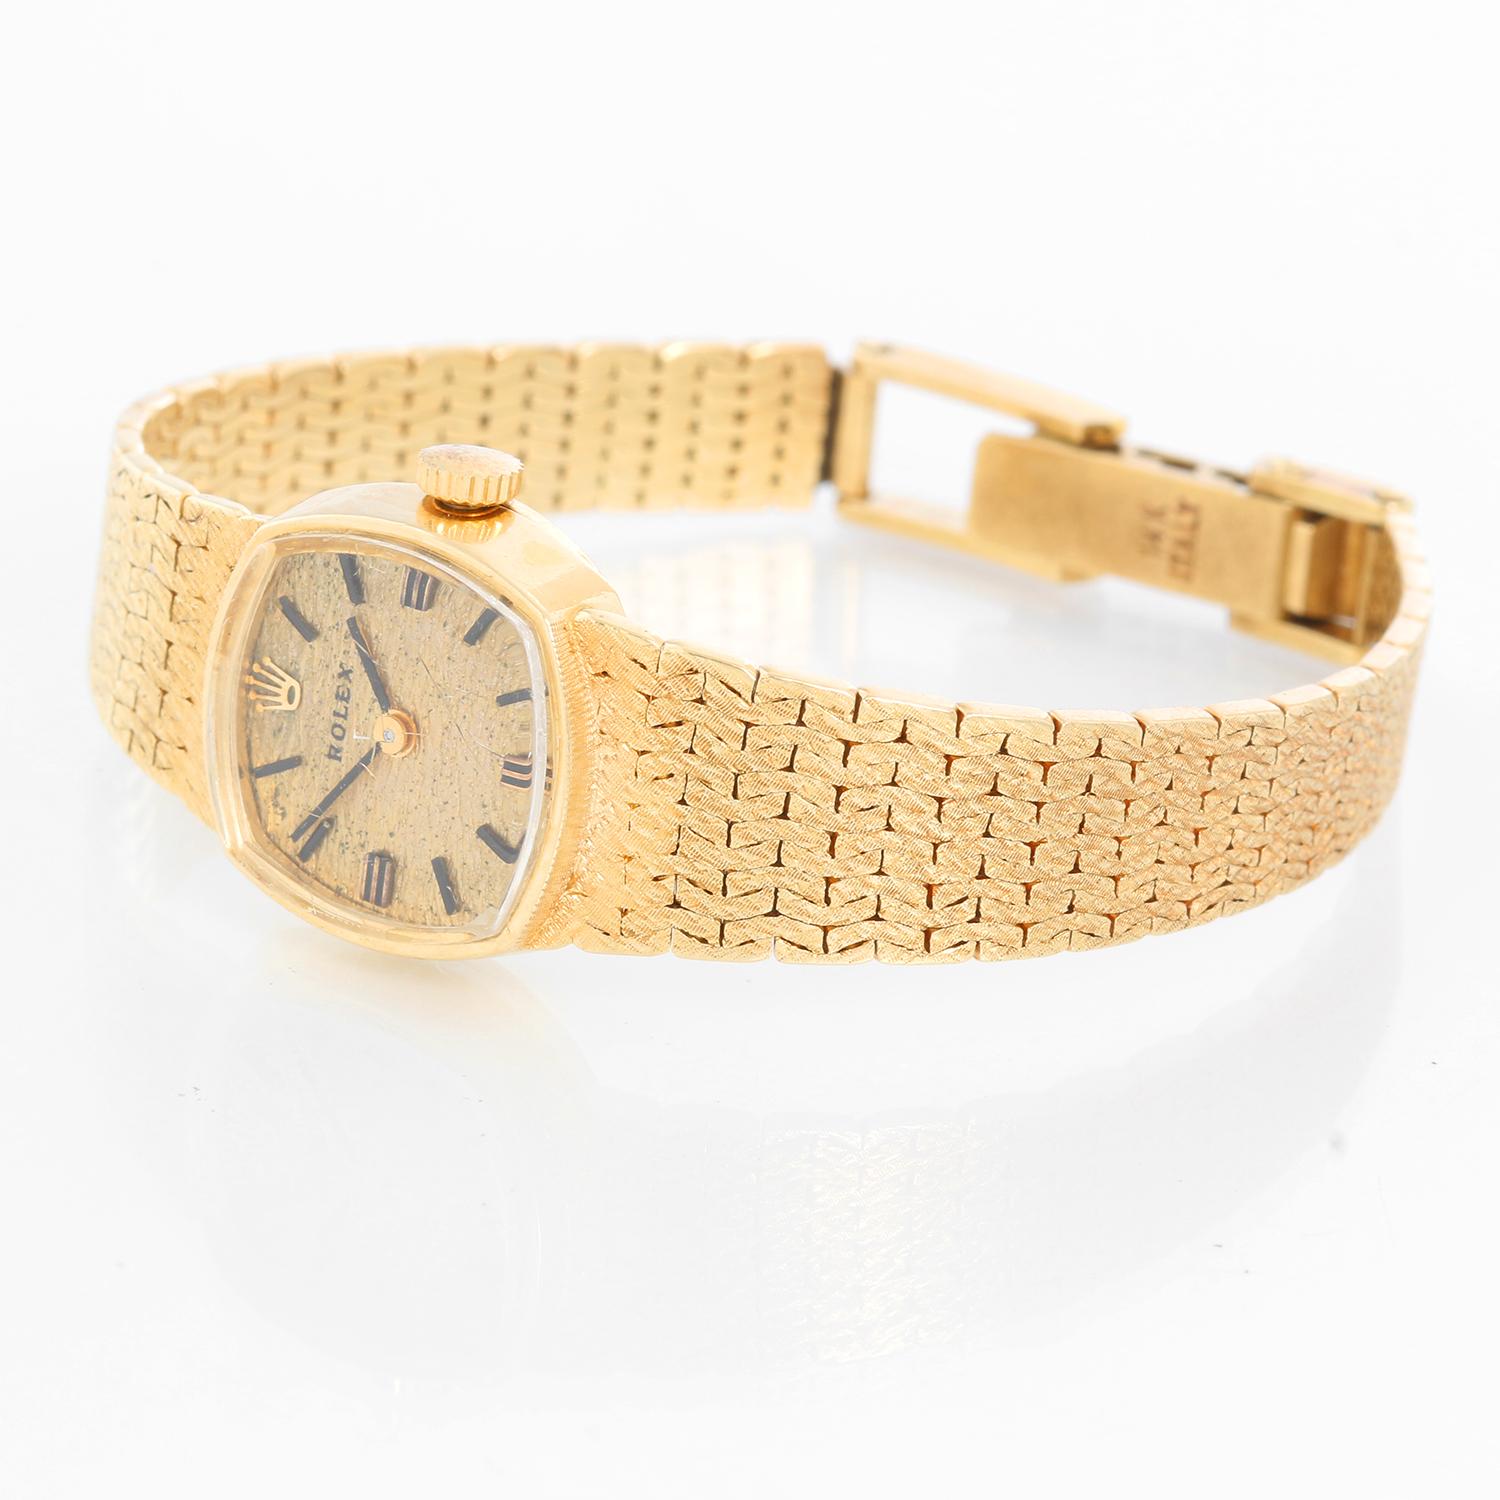 Vintage Rolex 14K Yellow Gold Rolex Watch Ref. 8214  - Manual. 14K Yellow gold case ( 17 mm ). Champagne textured dial with stick hour markers. 14K yellow gold mesh bracelet; will fit up to a 5 inch wrist. Pre-owned with custom box. Circa 1960's.